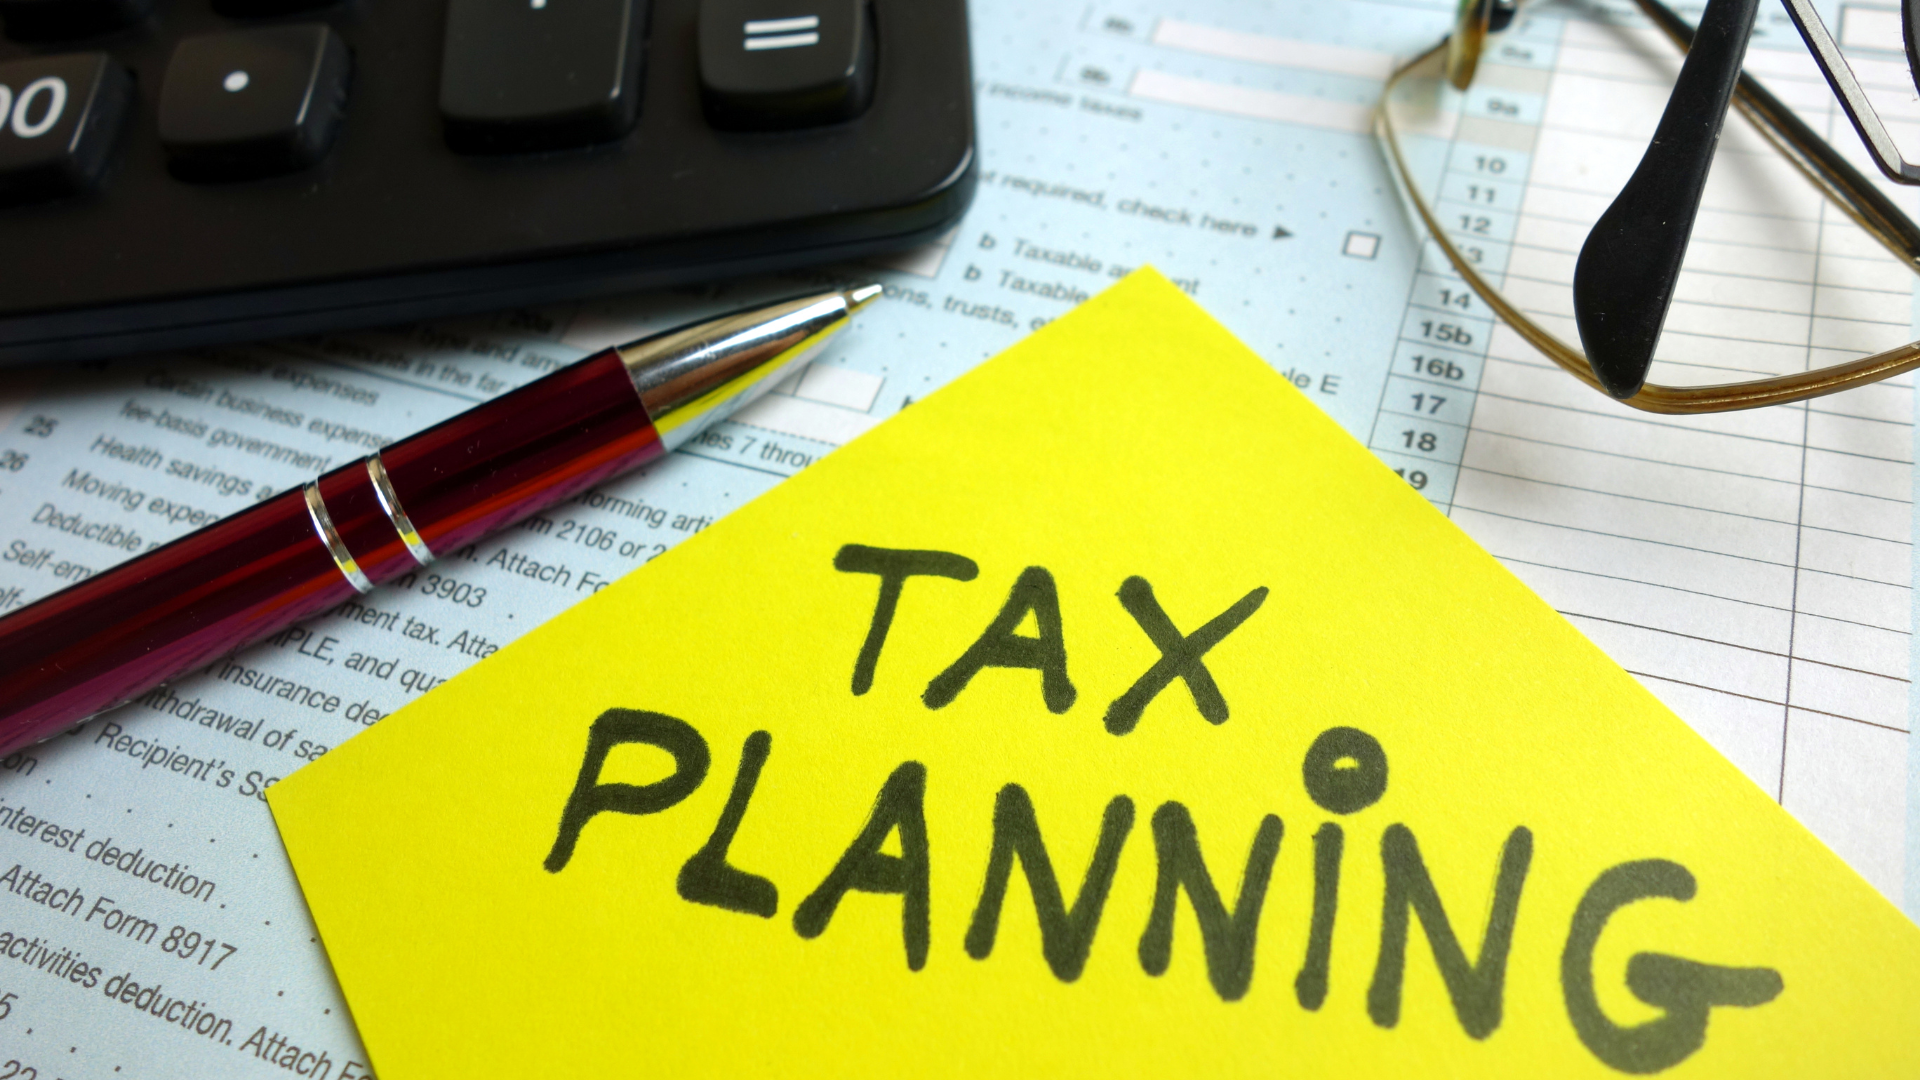 The Importance of Tax Planning